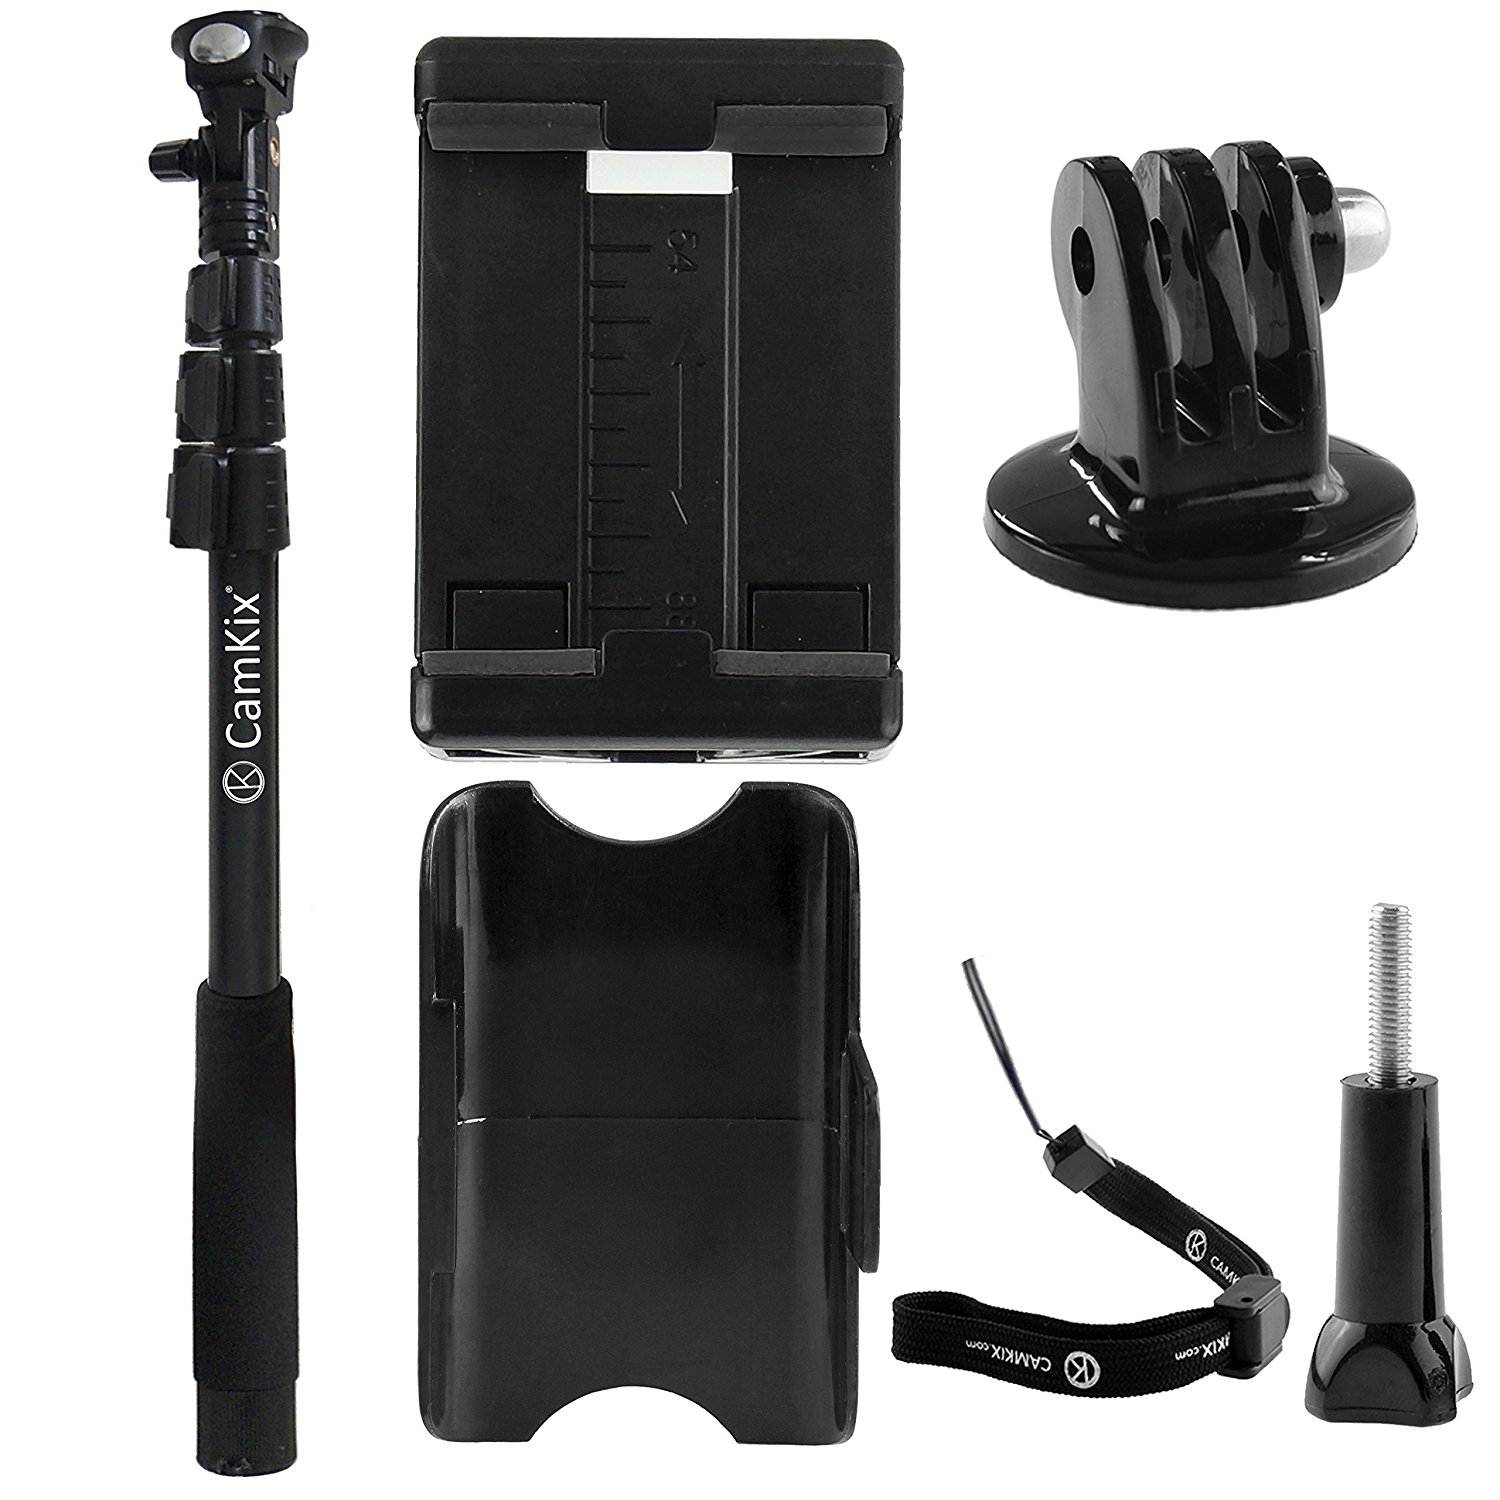 camkix premium telescopic pole 16 - 47 - for gopro hero 5 / 4, session, black, silver, hero+ lcd, 3+, 3, 2, 1, and compact cameras; and cell phones - with cradle for remote - strong and stable clip lo - image 2 of 8